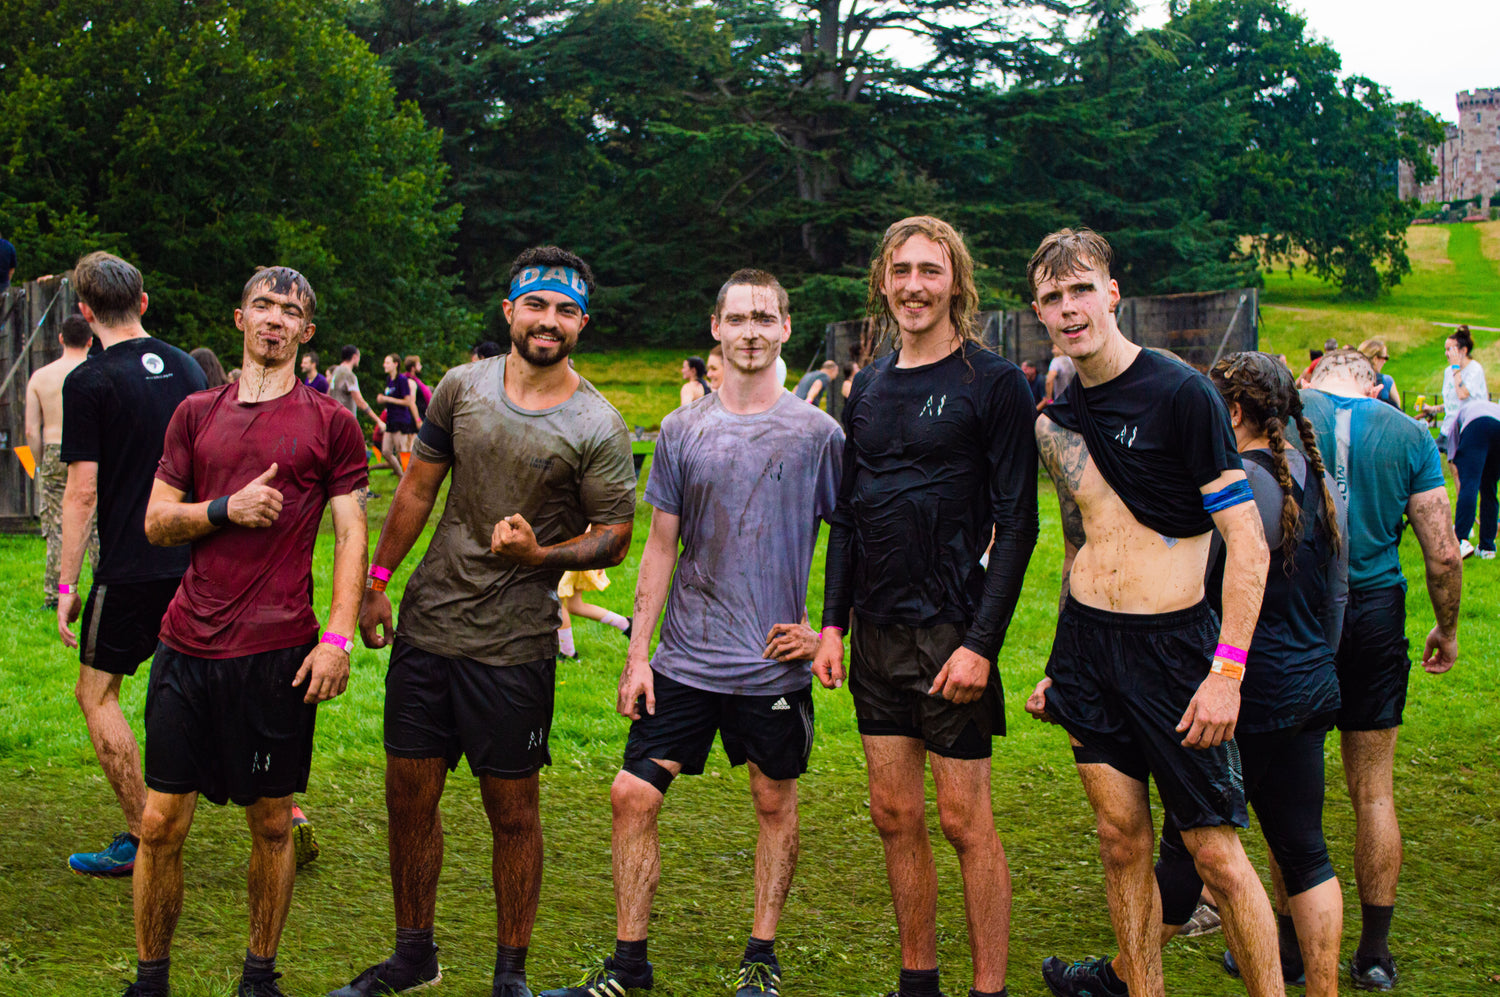 Animal Instinct Tough Mudder Group, with Nile Breeze, Chris Williams, Liam Bedford, Owen Walters and Liam Hopkins